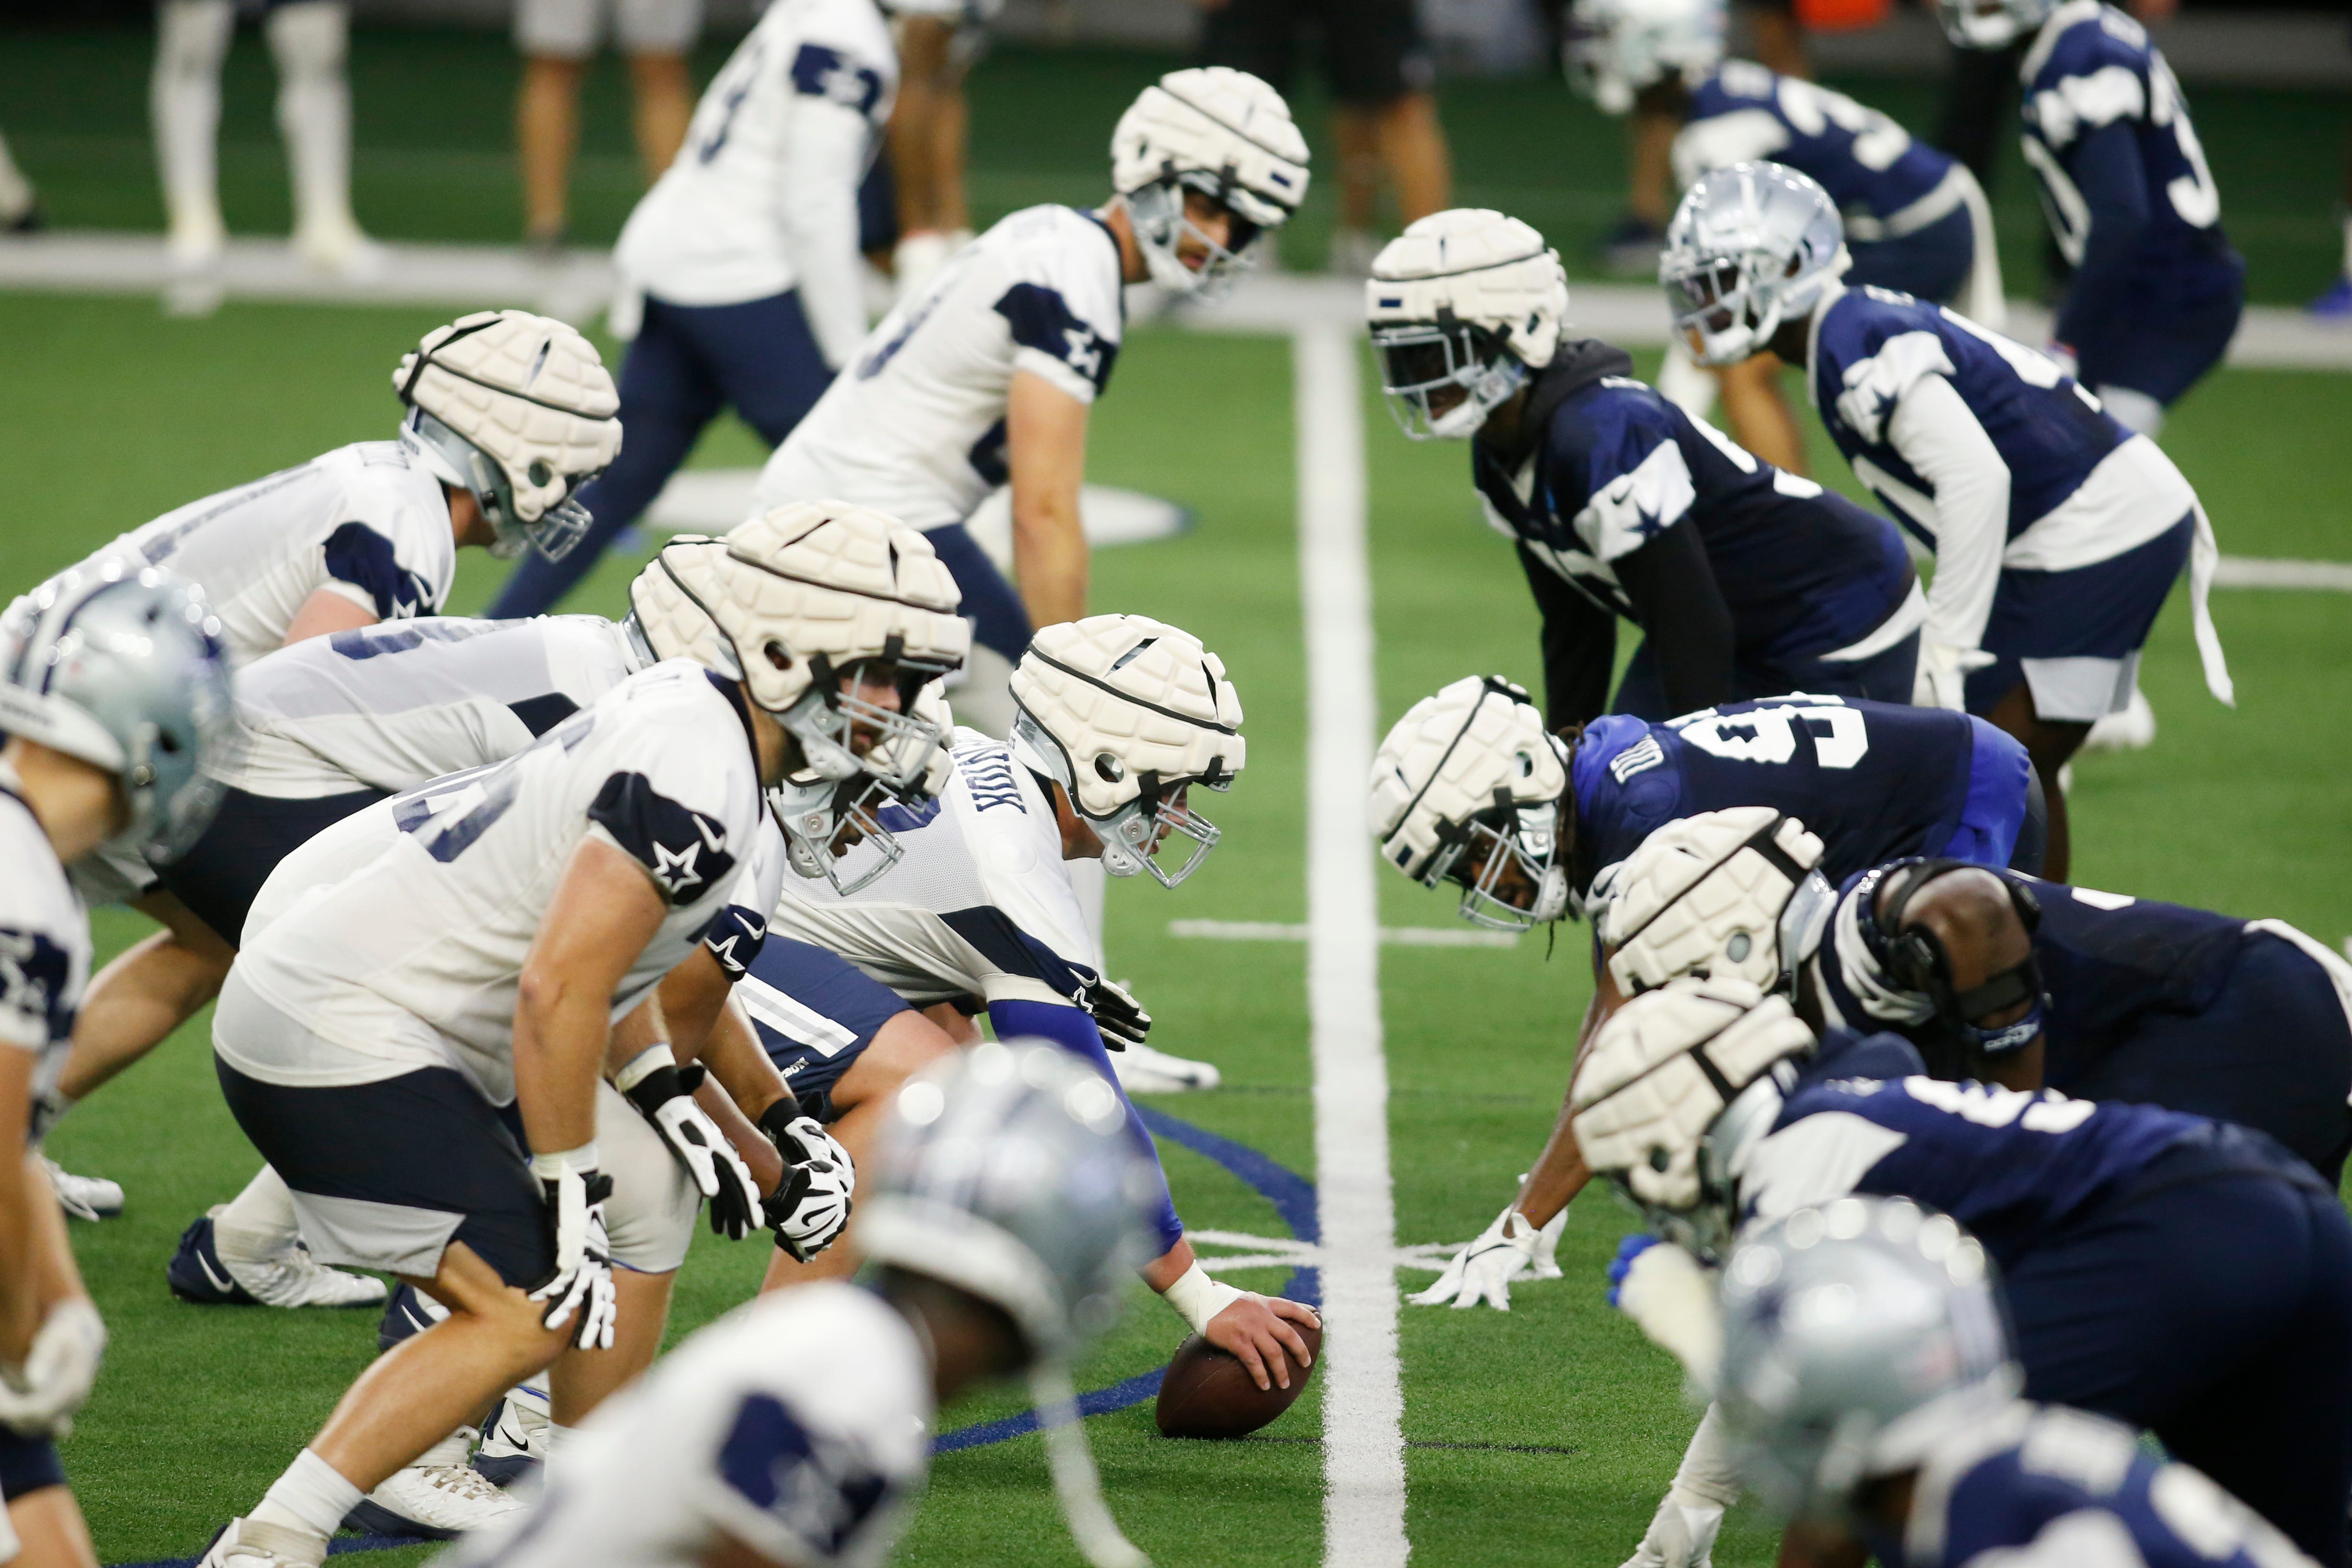 Dallas Cowboys players line up for a drill during minicamp at the Ford Center at the Star Training Facility in Frisco, Texas, on June 14.